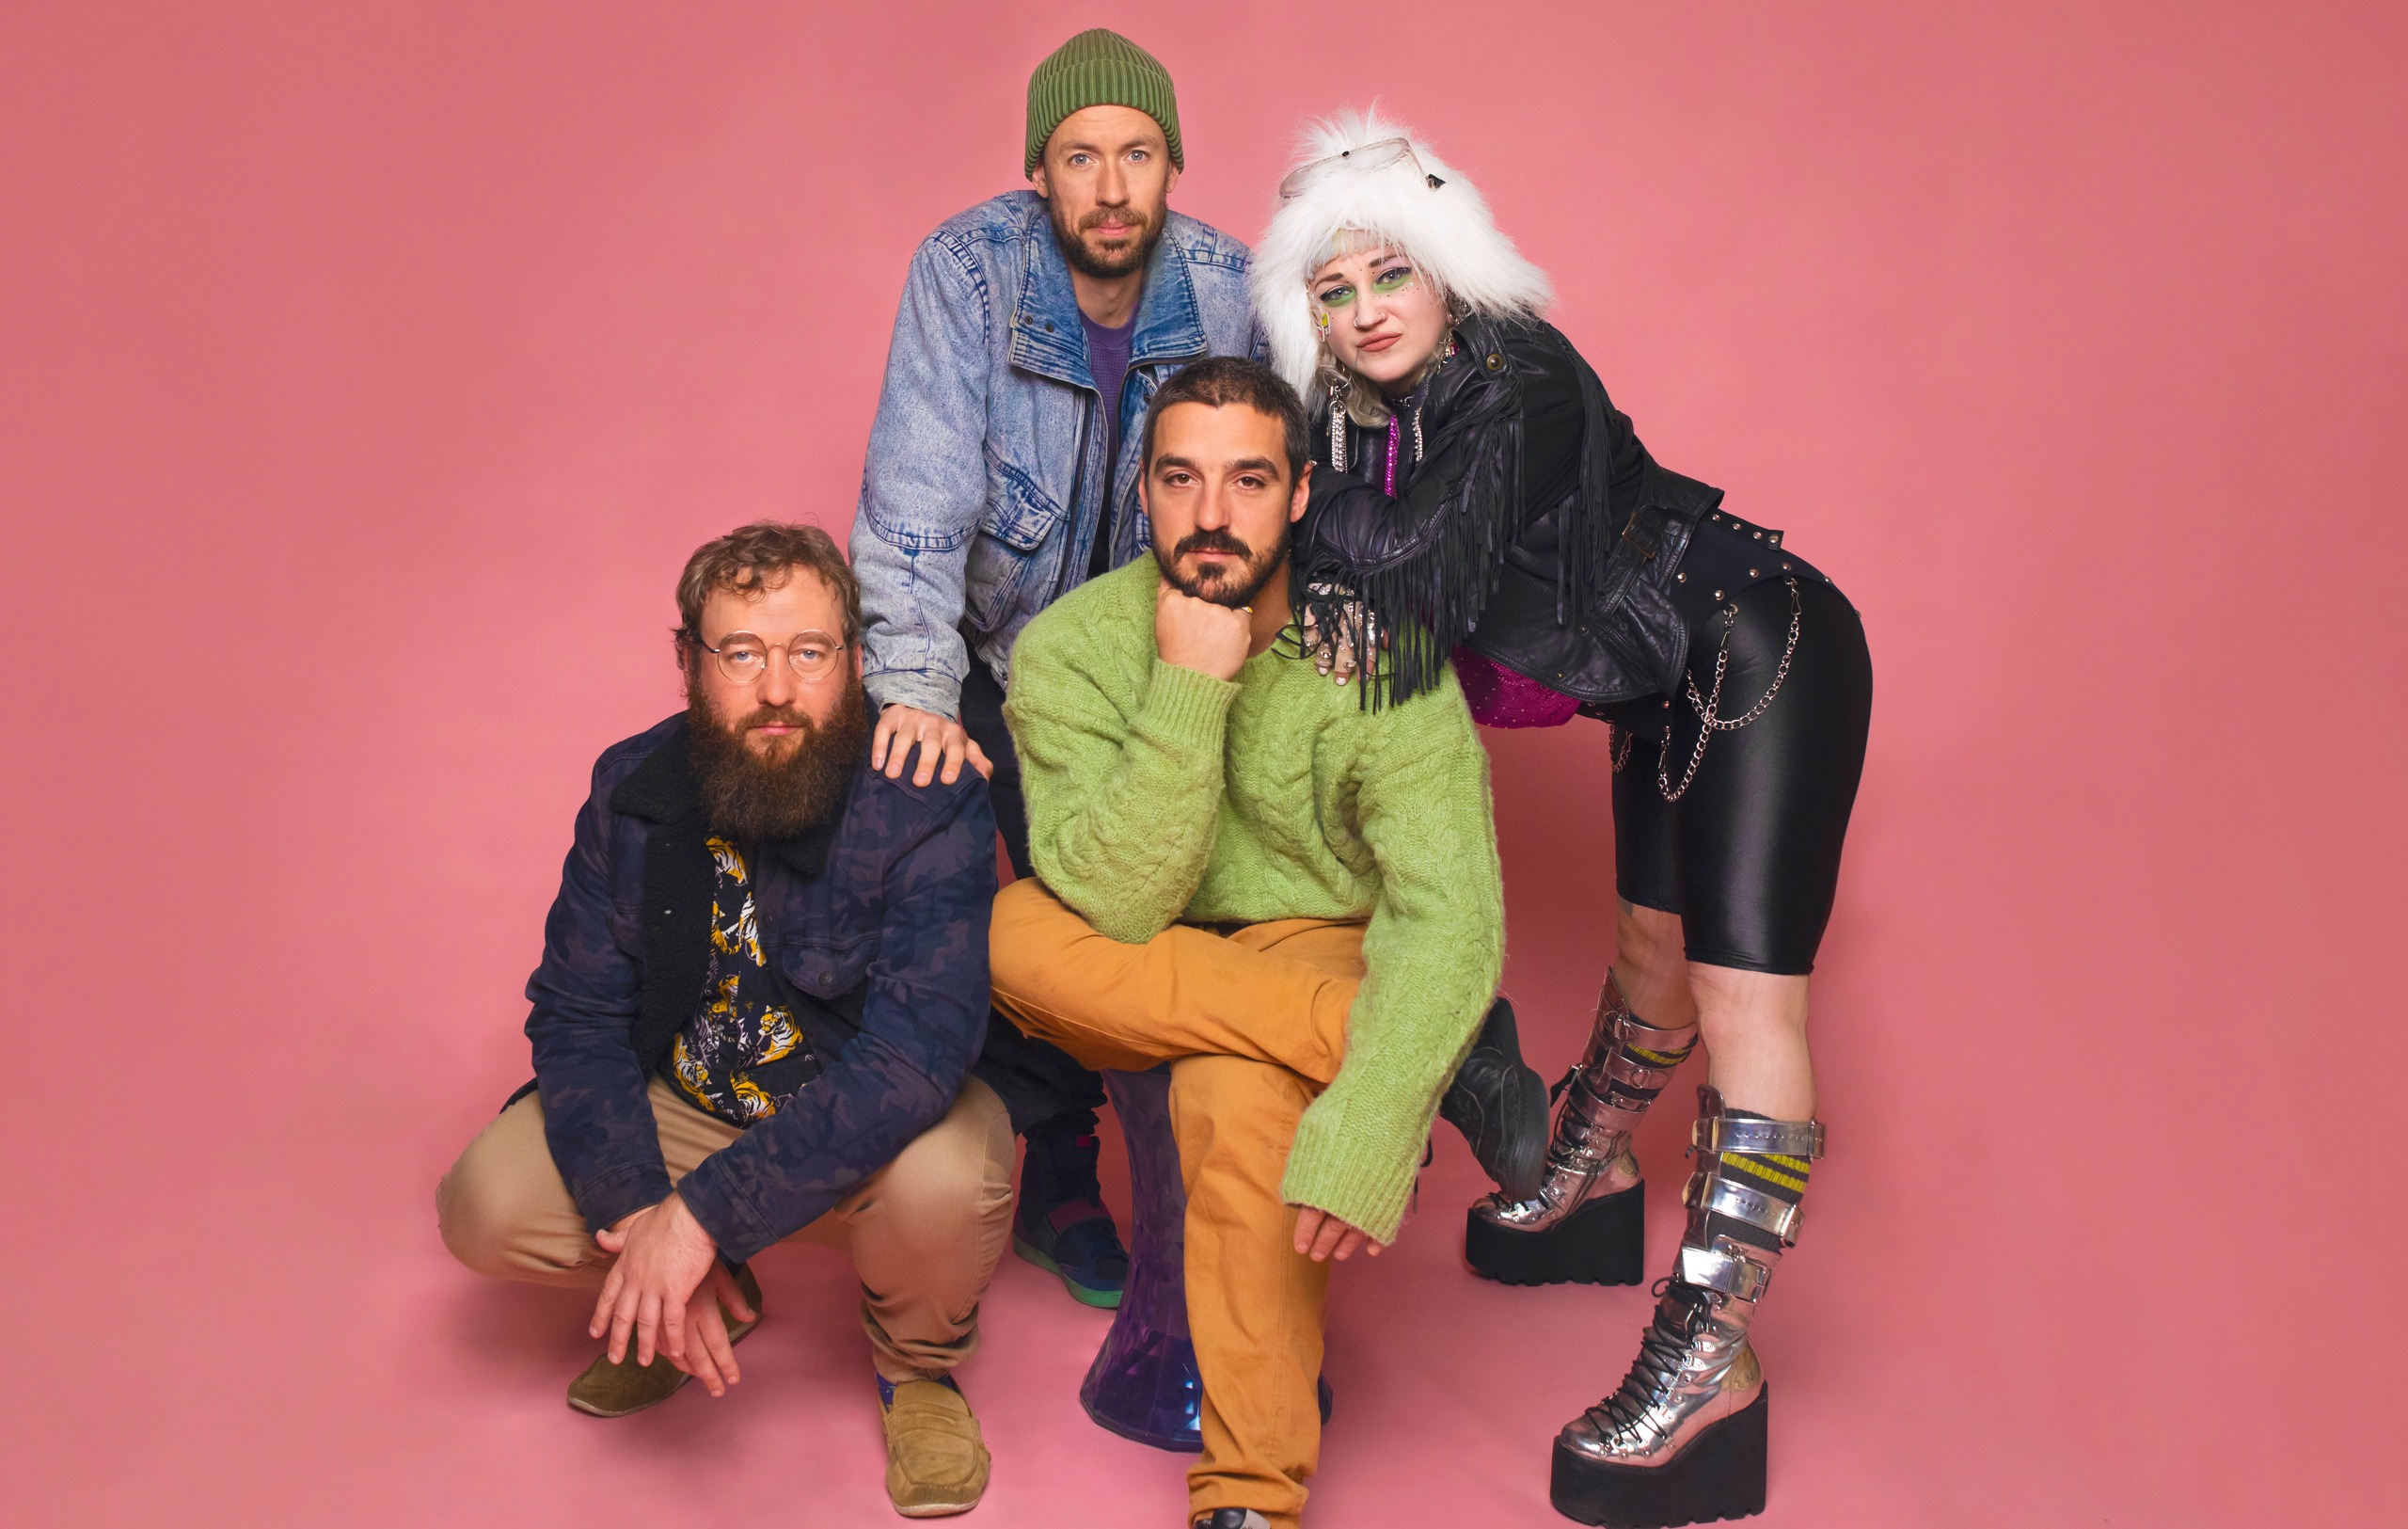 Whether you’re a longtime fan or you’ve never heard of Hiatus Kaiyote before, these Aussies know how to rock. Next time get a ticket—you will not regret it. Alexis Perno recaps their show at the Union Event Center.